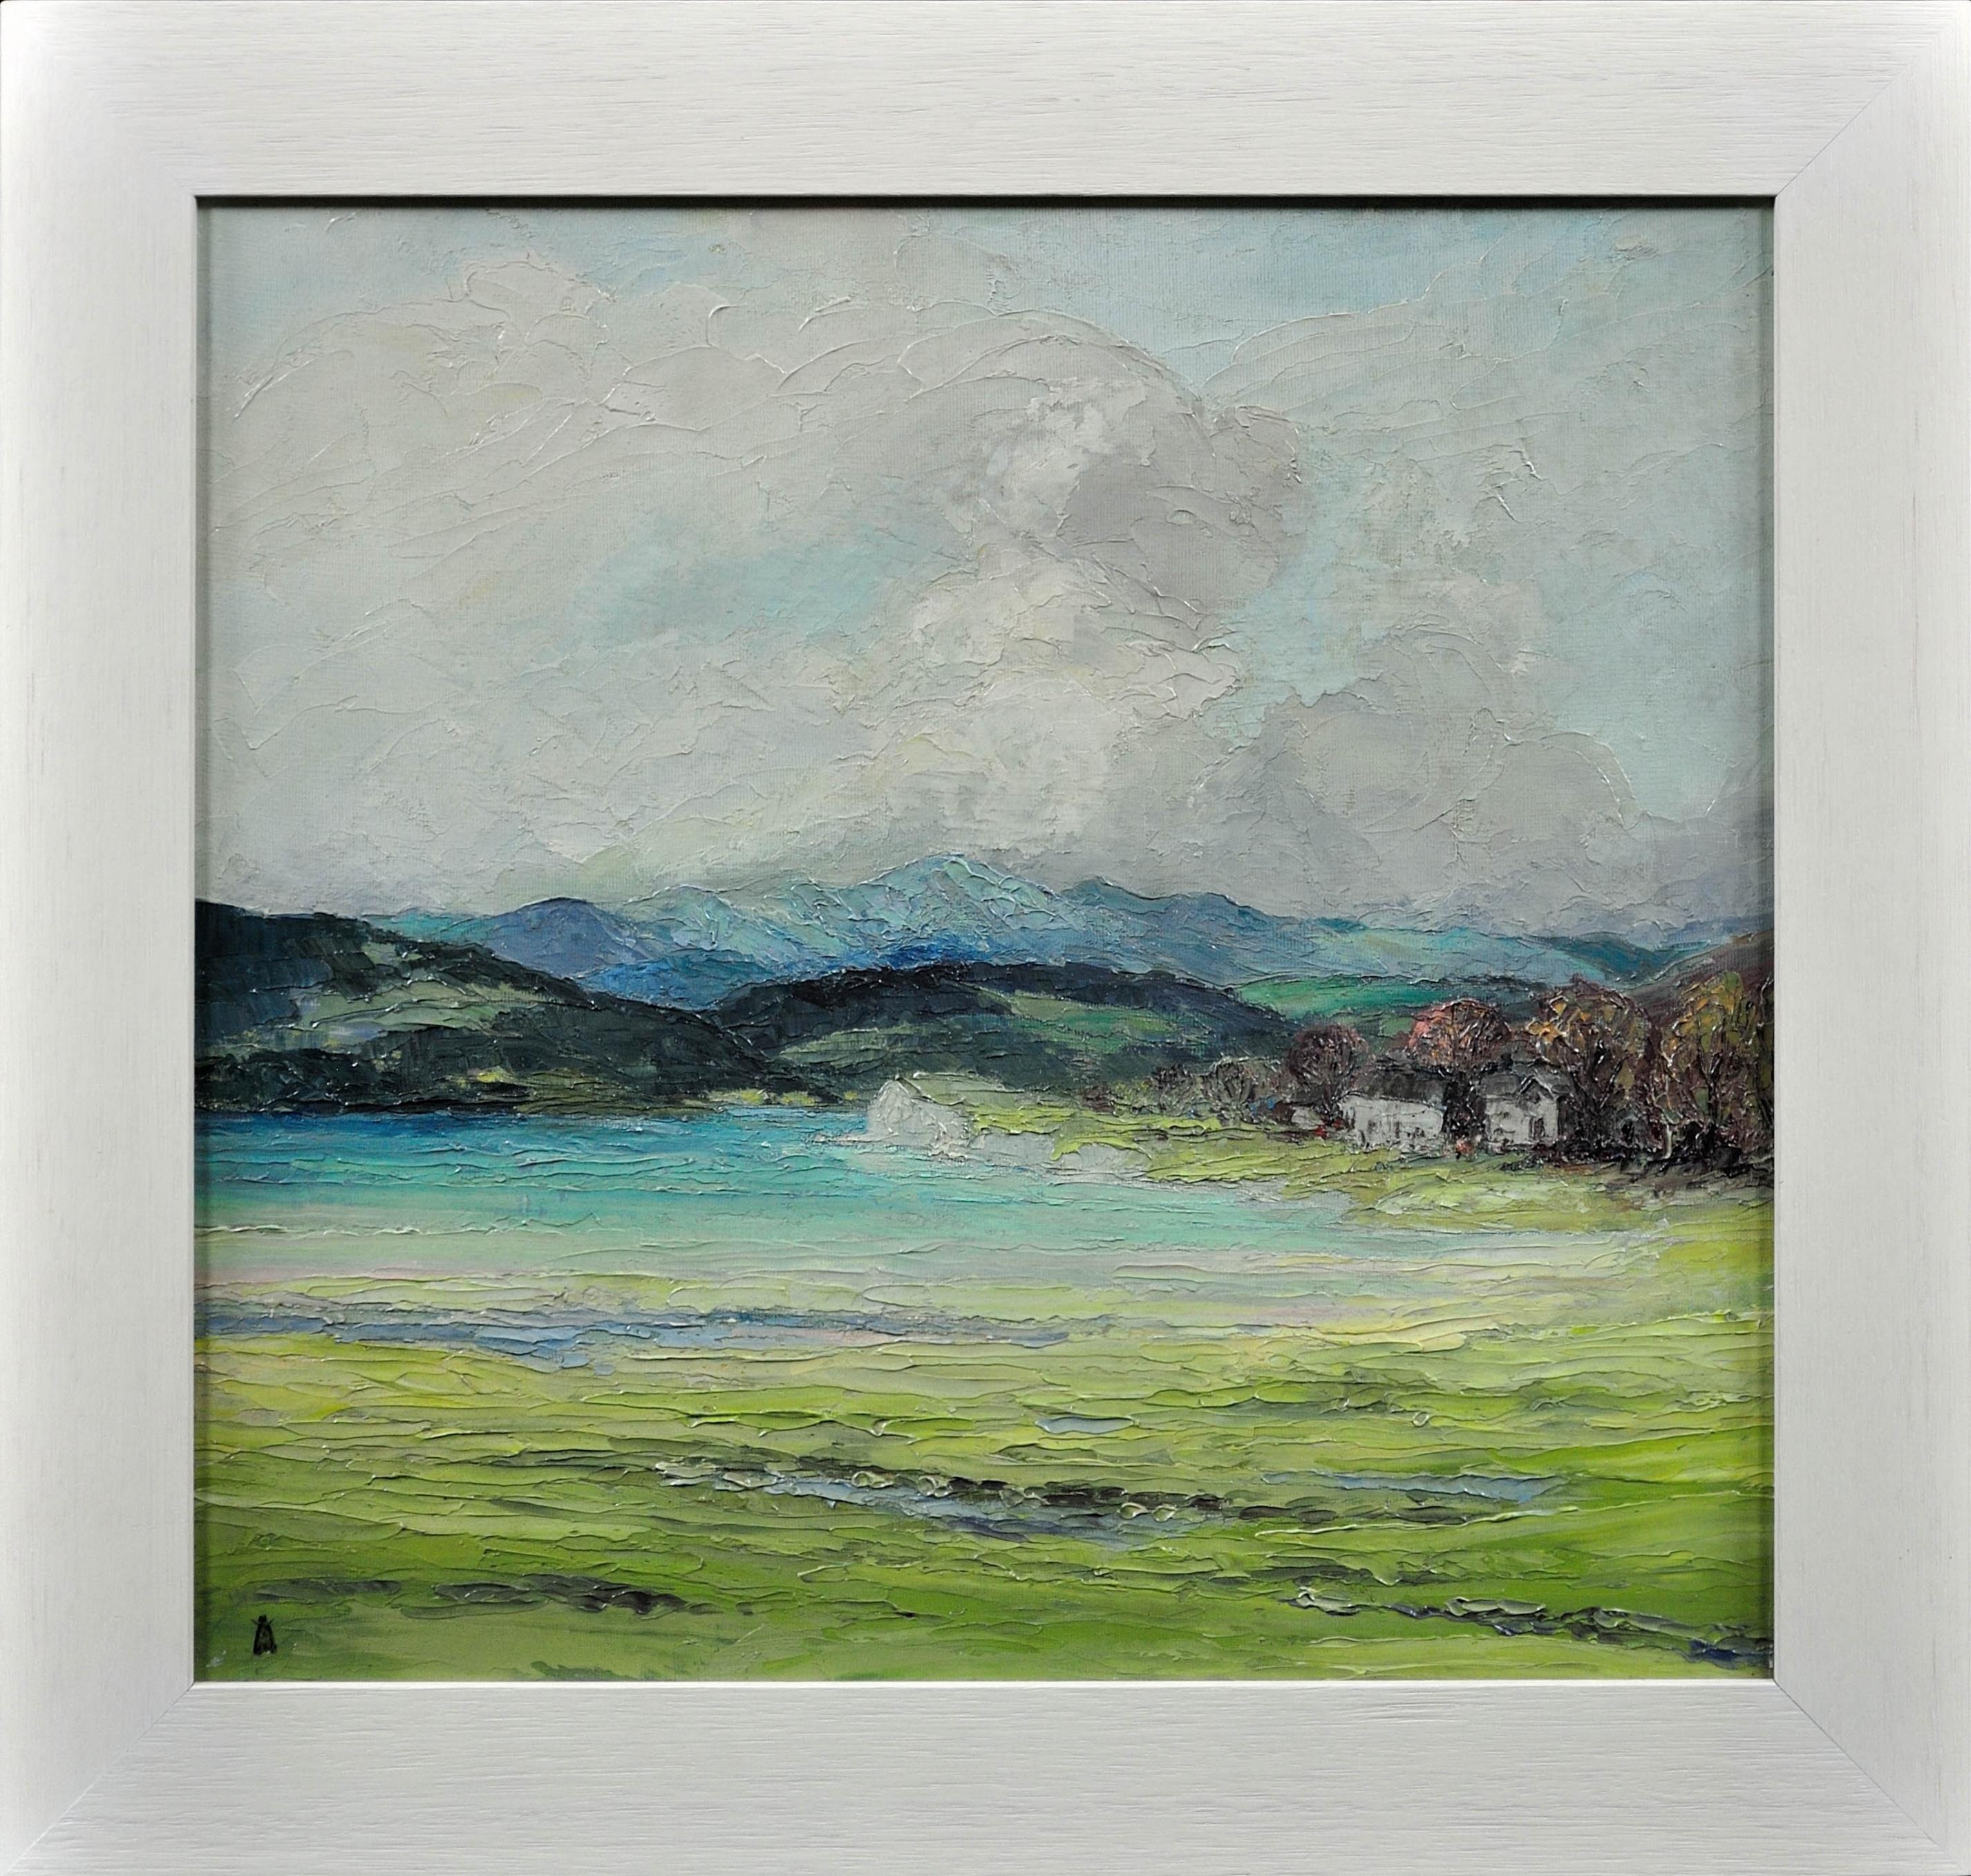 Helen Layfield Bradley. 
English ( b.1900 - d.1979 ).
Sunshine & Shadows Across the Leven Estuary, Lake District, 1965.
Oil on Board. Signed.
Image size 15.9 inches x 16.9 inches ( 40.5cm x 43cm ).
Frame size 20.1 inches x 21.3 inches ( 51cm x 54cm